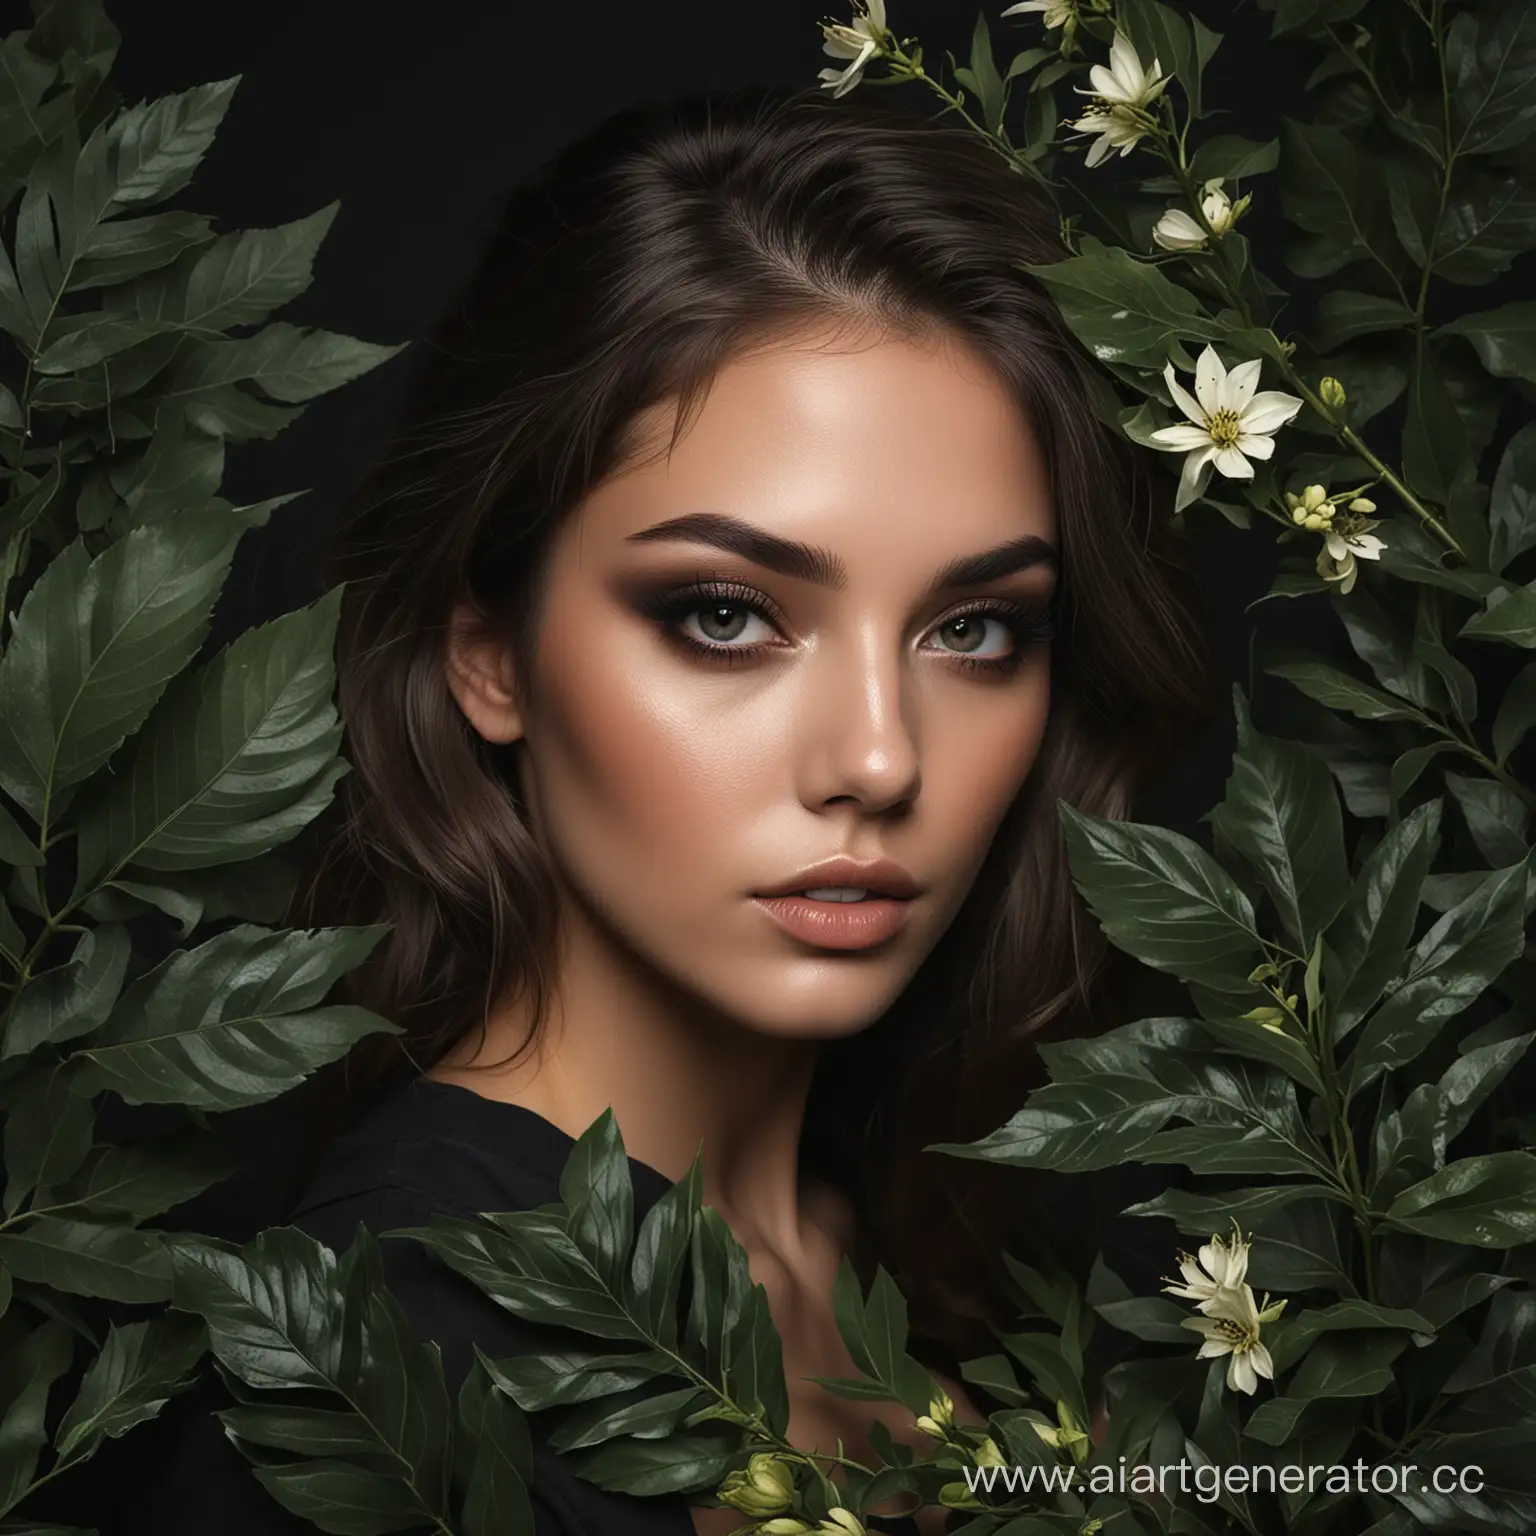 Cosmetic-Portrait-of-a-Girl-Amidst-Floral-Splendor